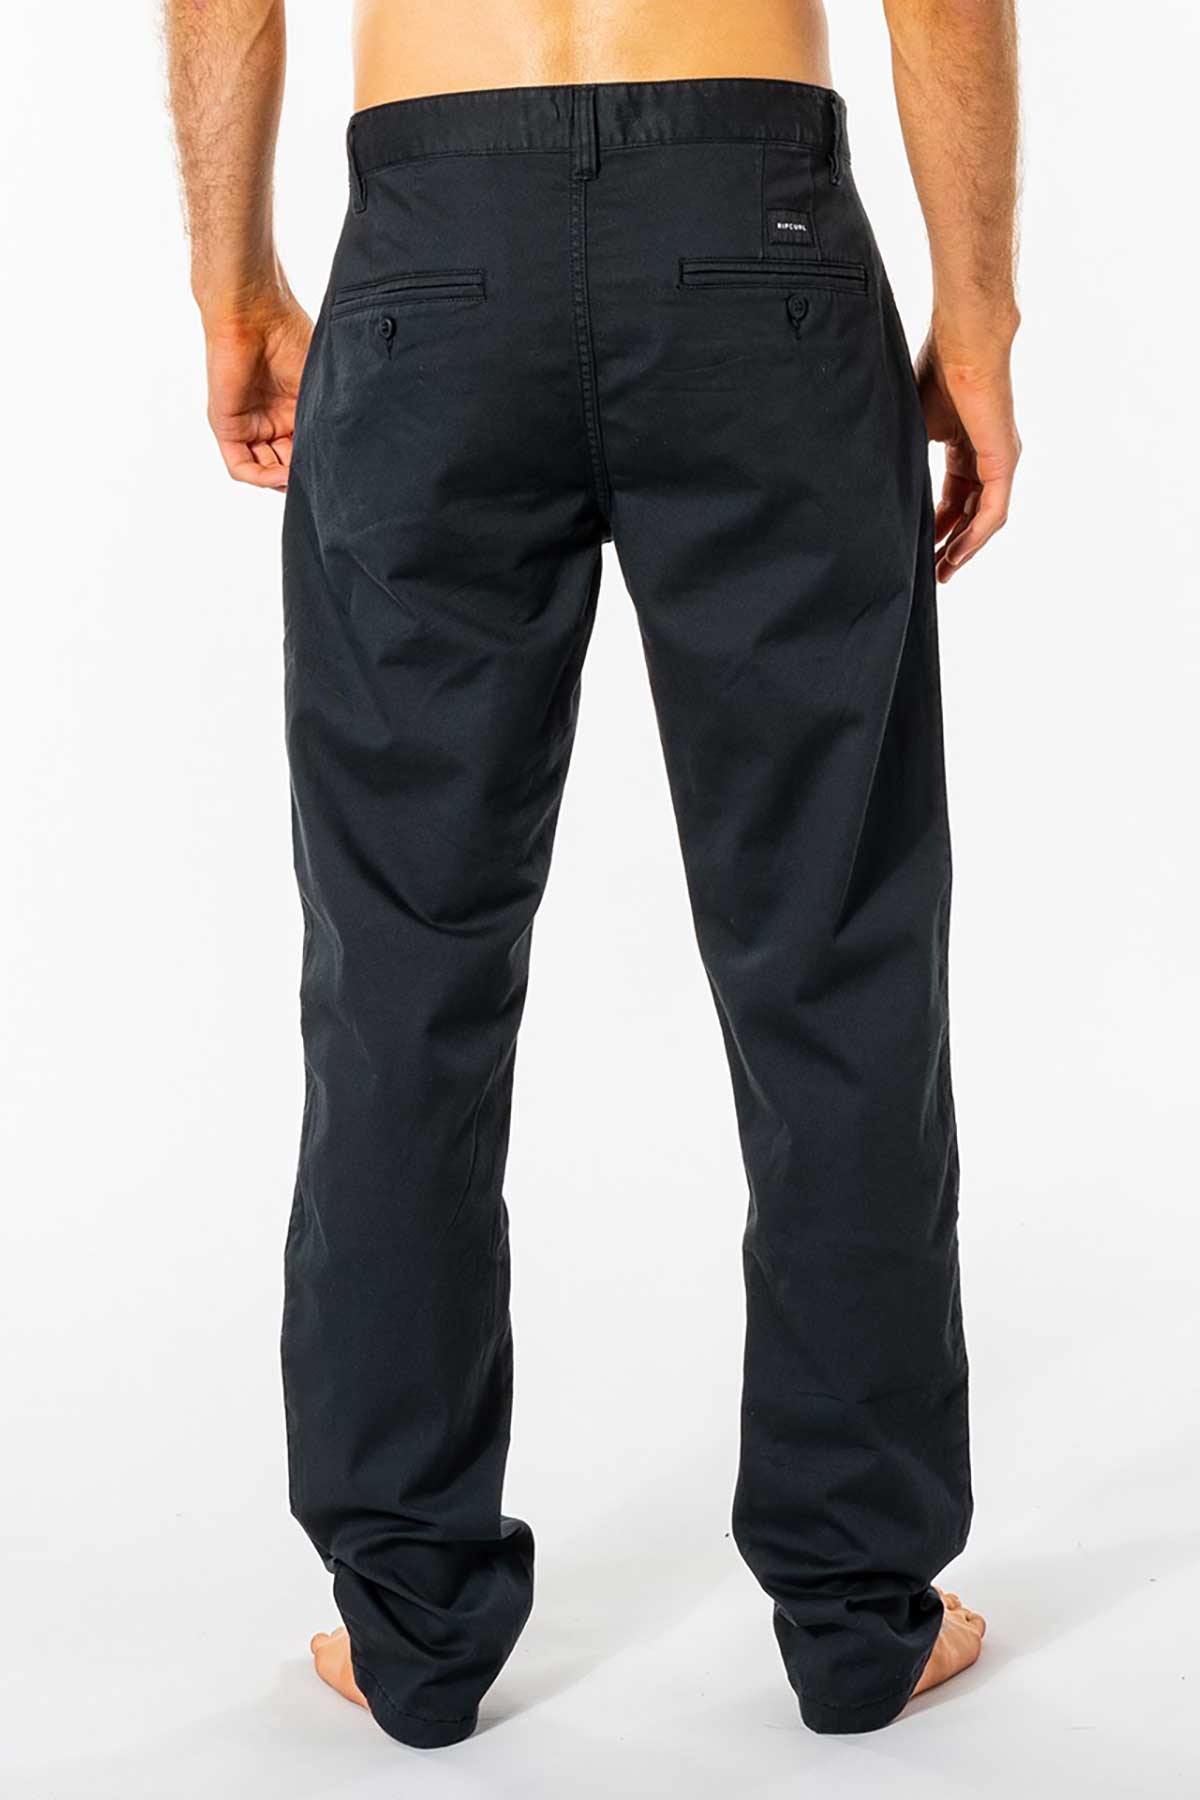 Rip Curl Mens Pant Re Entry Chino in black back view